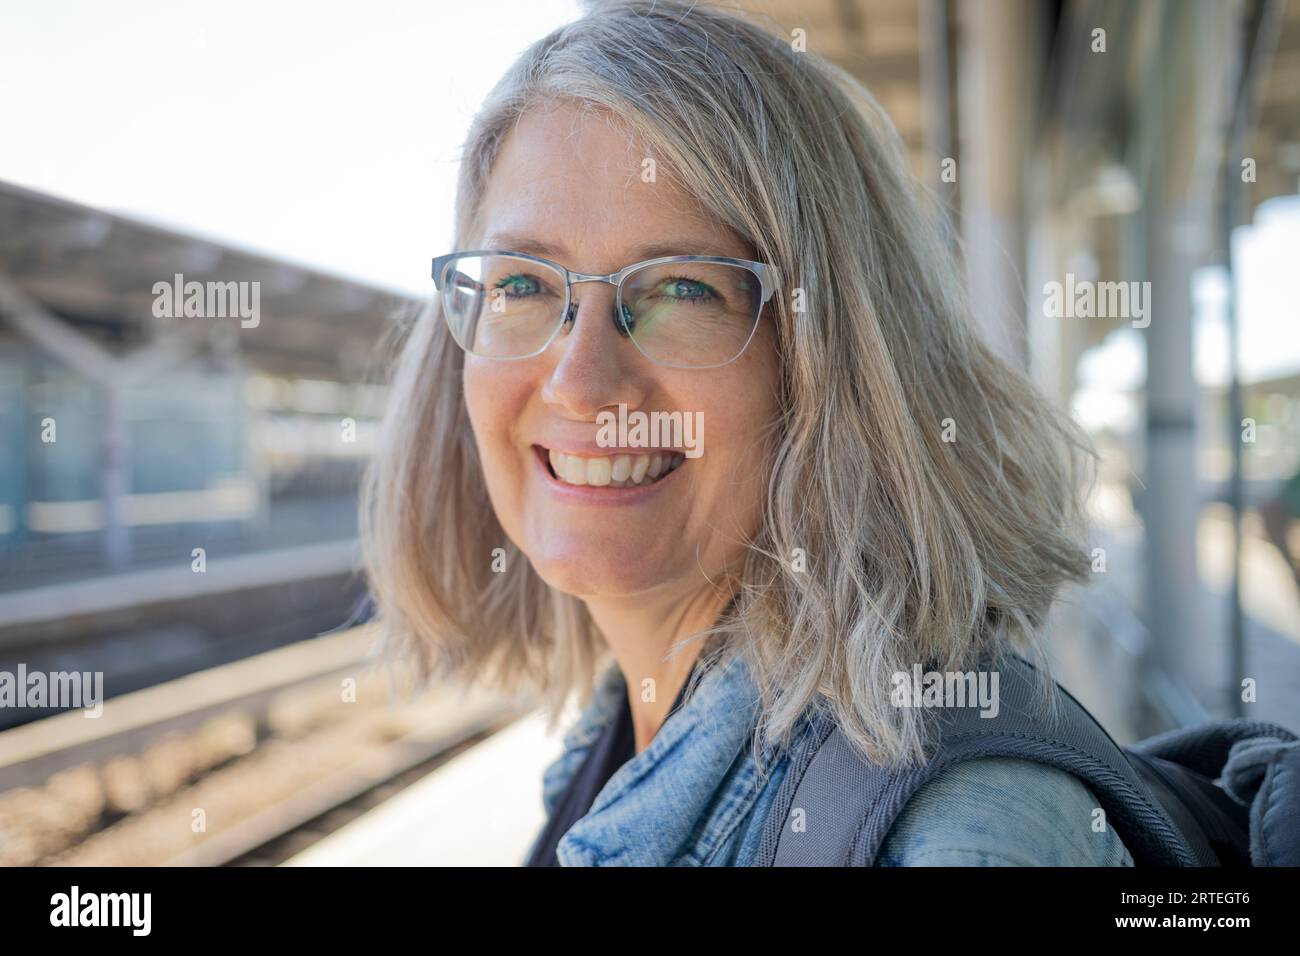 Close-up portrait of a mature woman waiting at a train station; United Kingdom Stock Photo